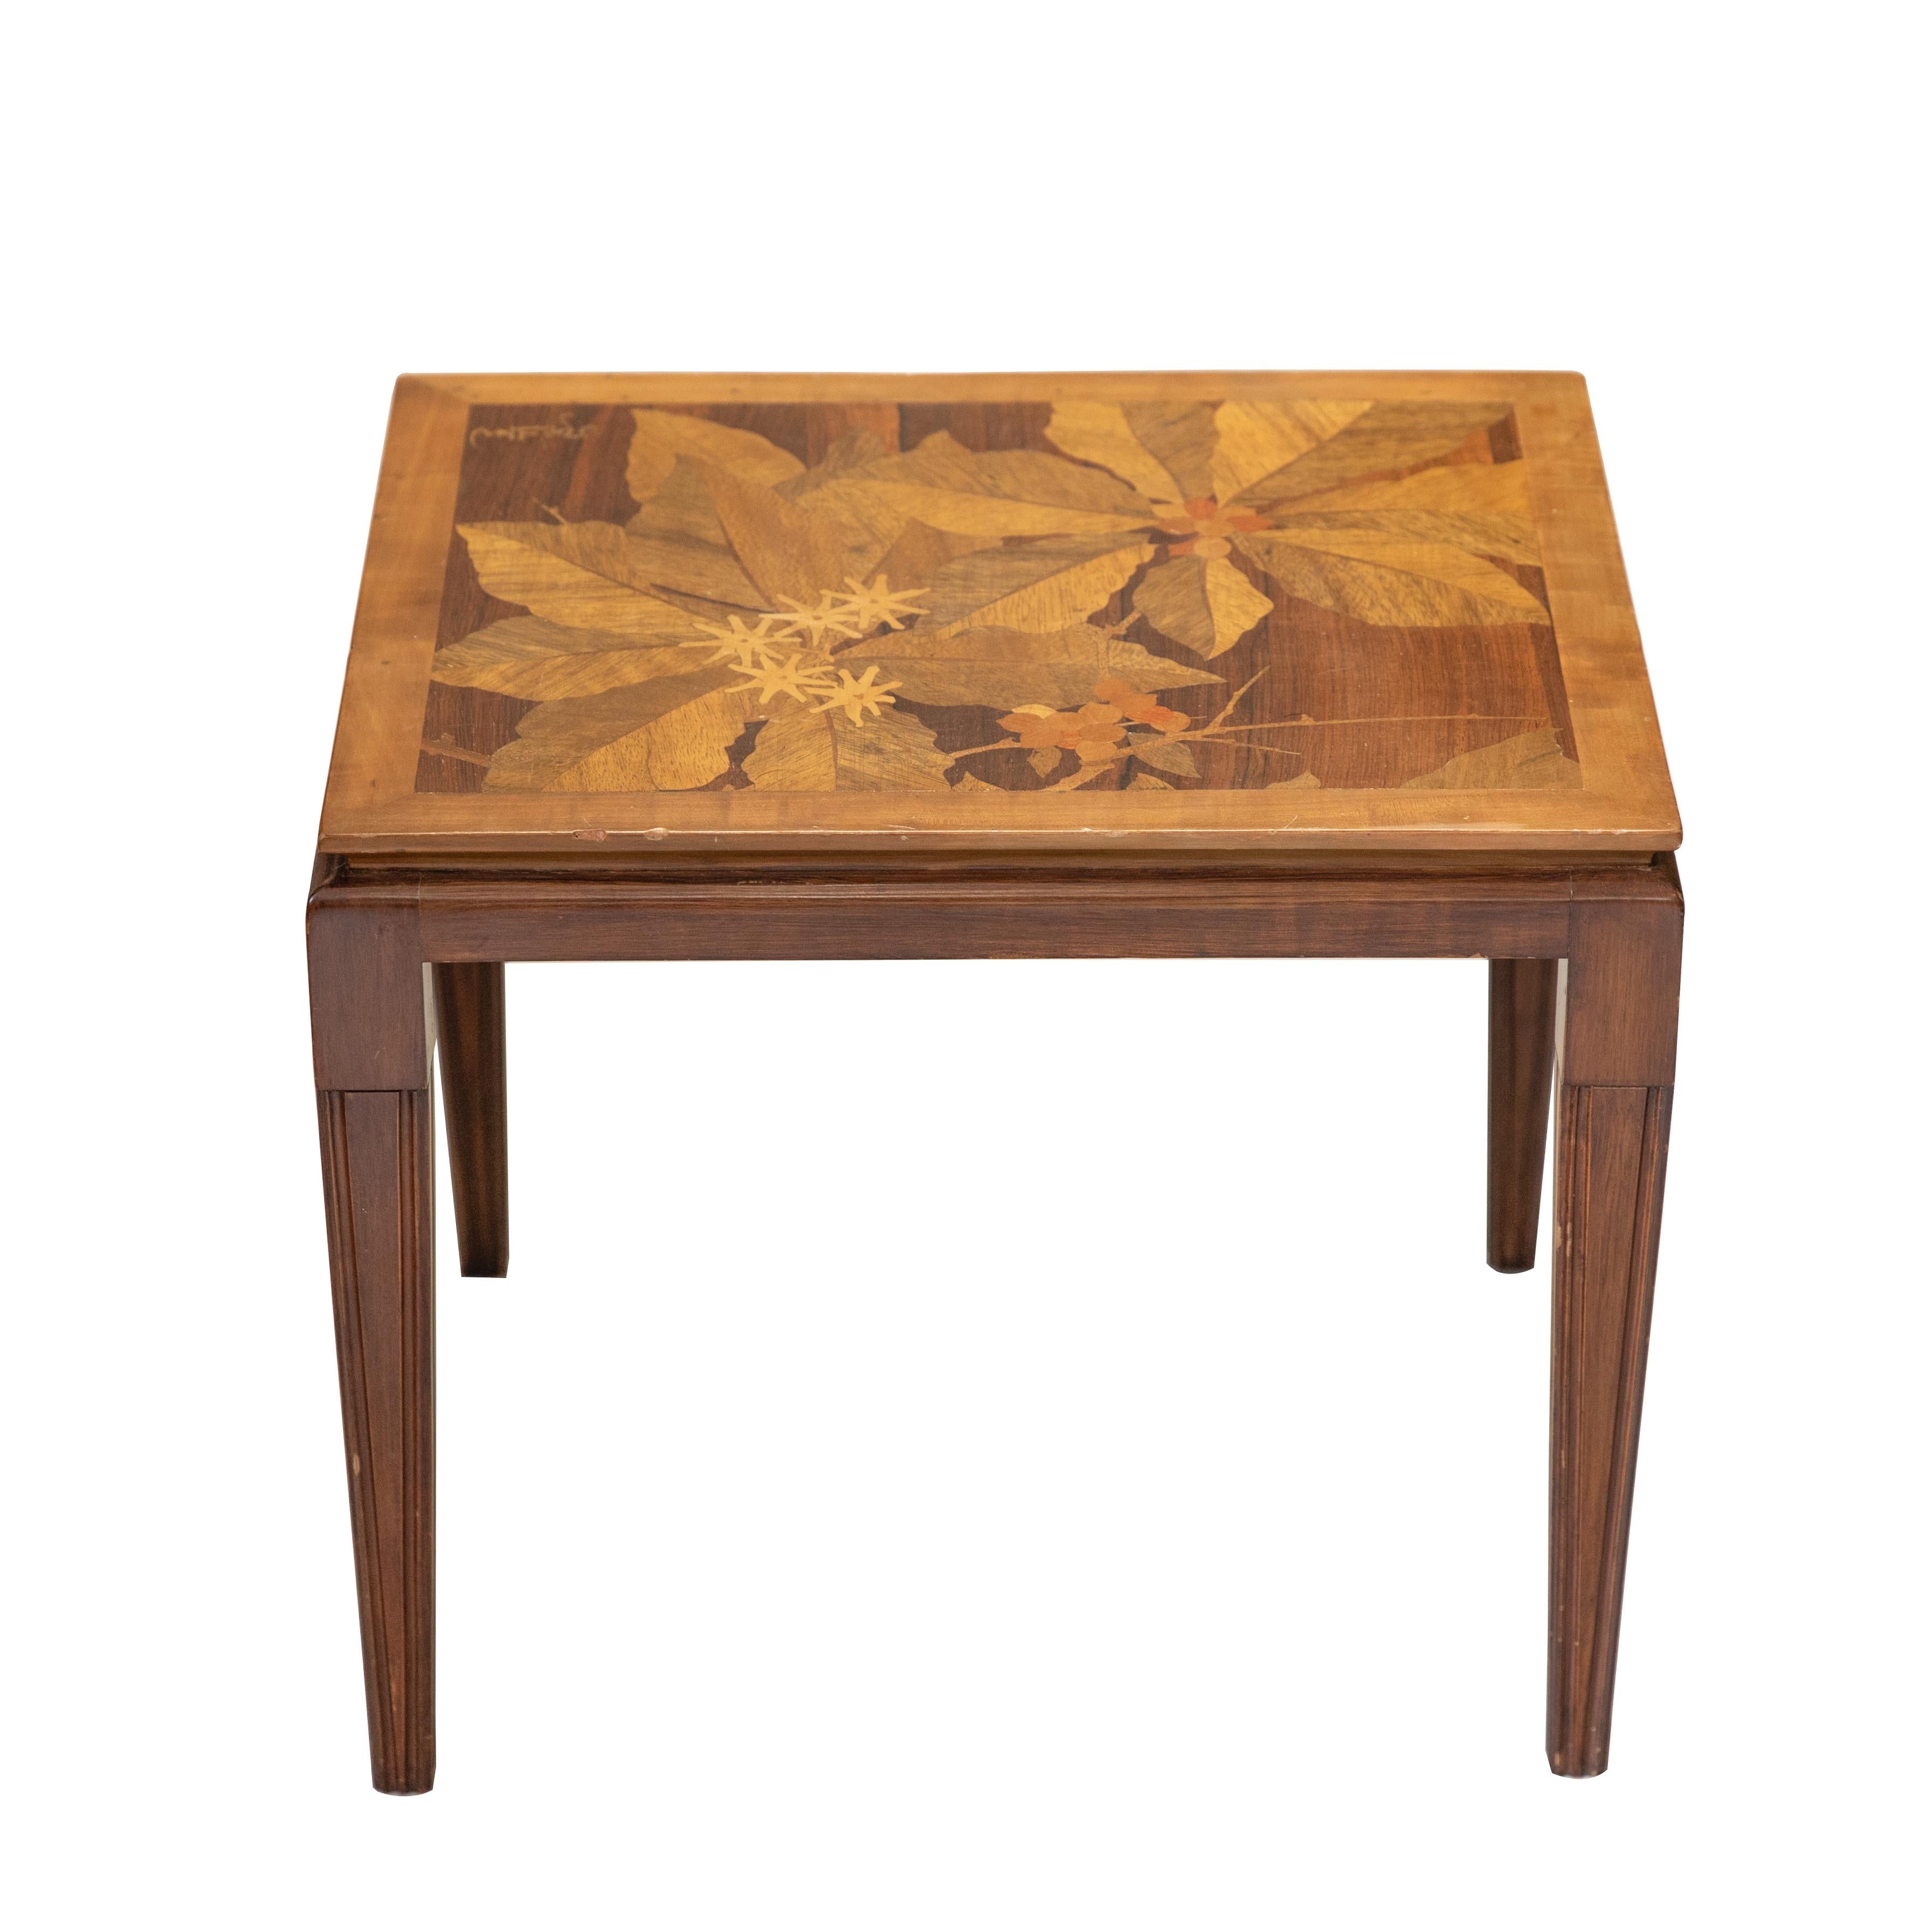 Inlay Gallé Inlaid Early 20th Century Art Nouveau Side Table with Floral Motifs